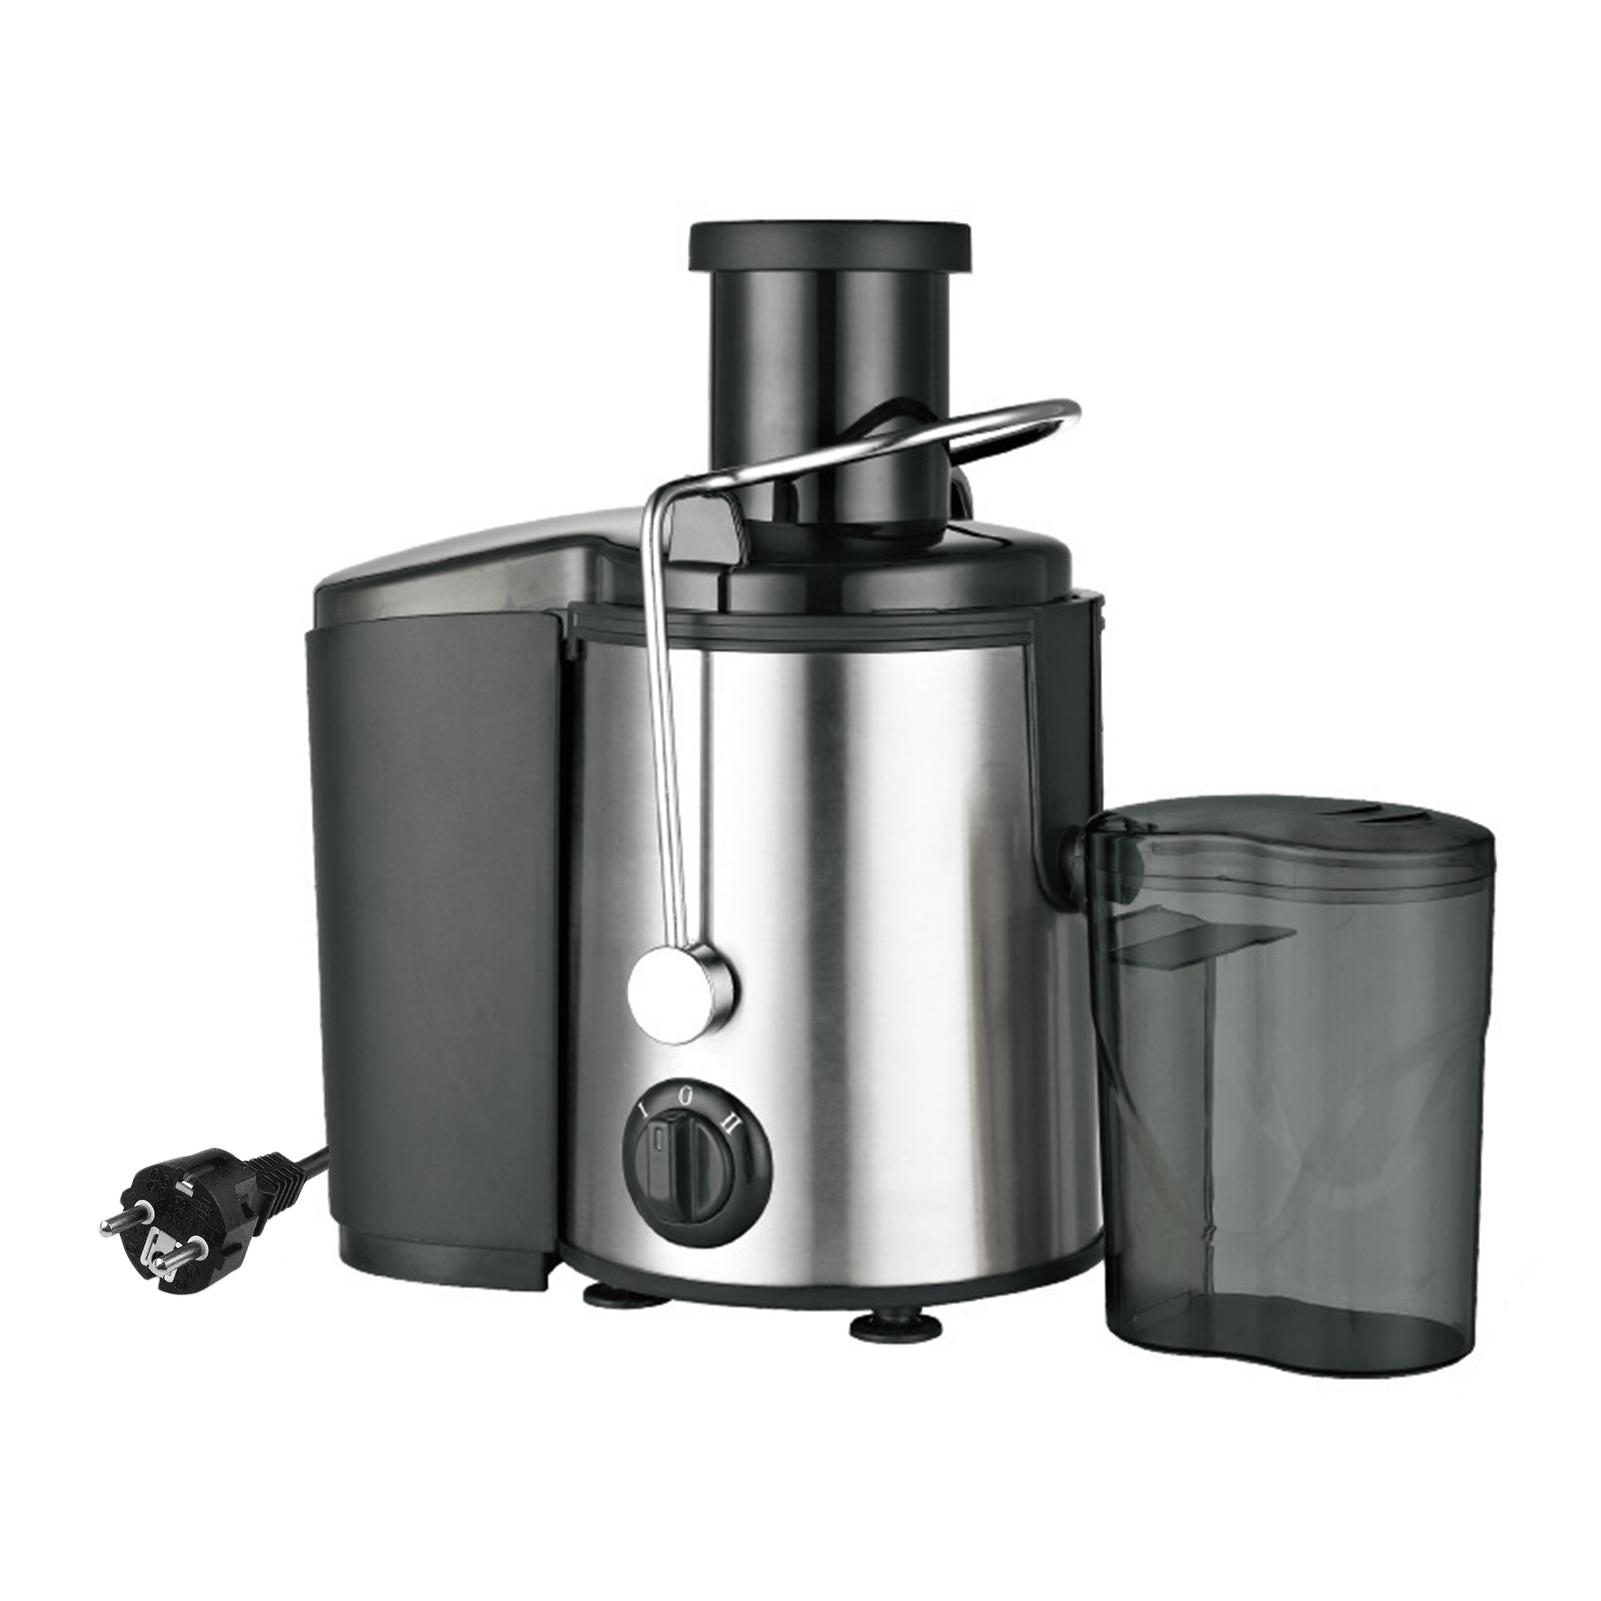 TOMTOP JMS Juicer Machines Extractor 800W Centrifugal Juicers Electric Anti-Drip 2 Speed Adjustable with Juice